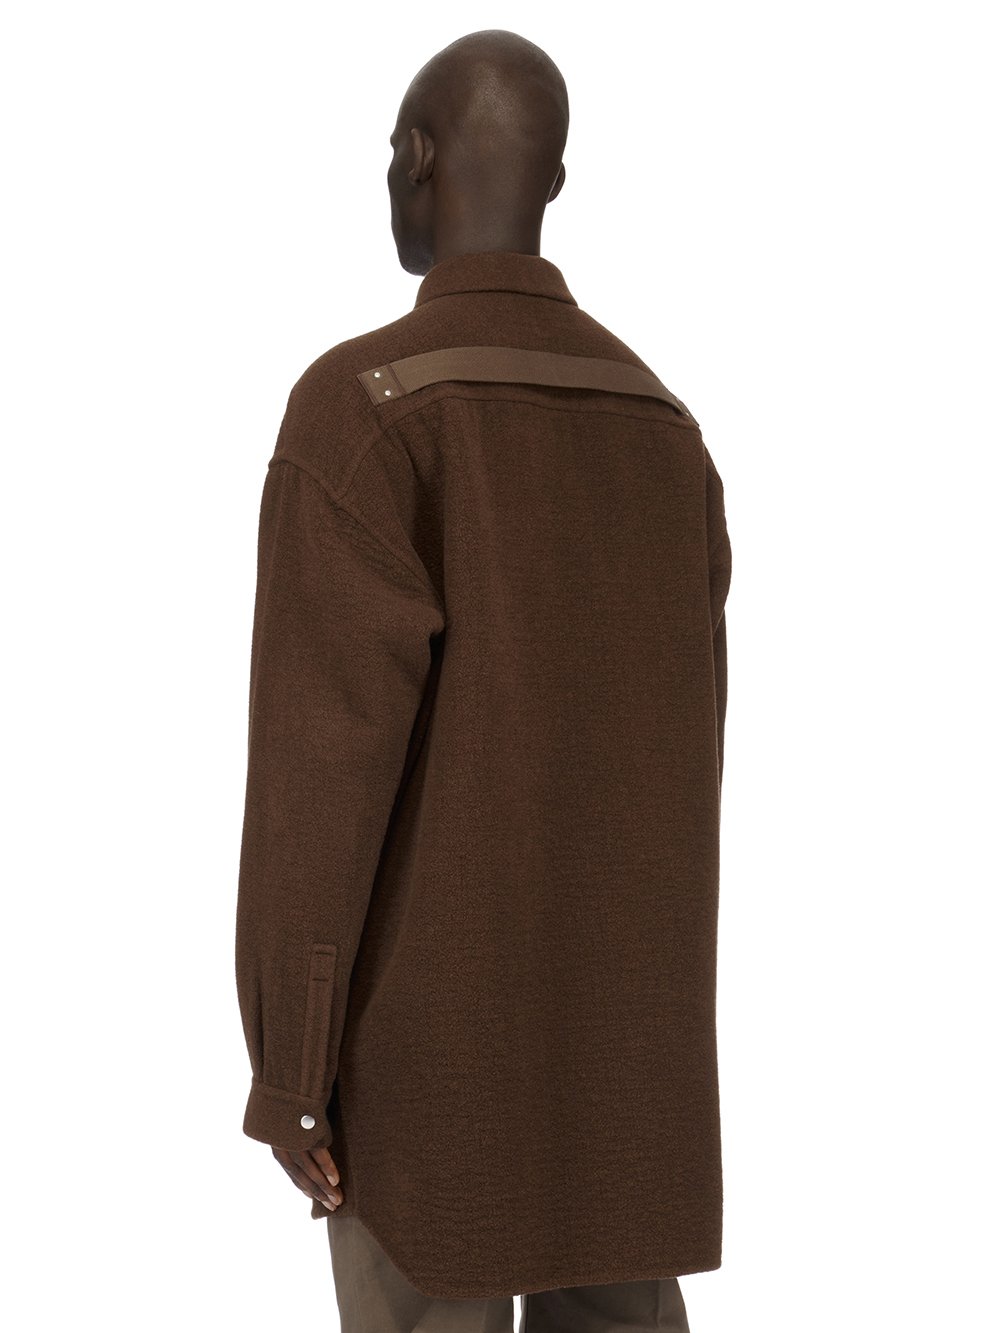 RICK OWENS FW23 LUXOR OVERSIZED OUTERSHIRT IN BROWN DOUBLE CASHMERE